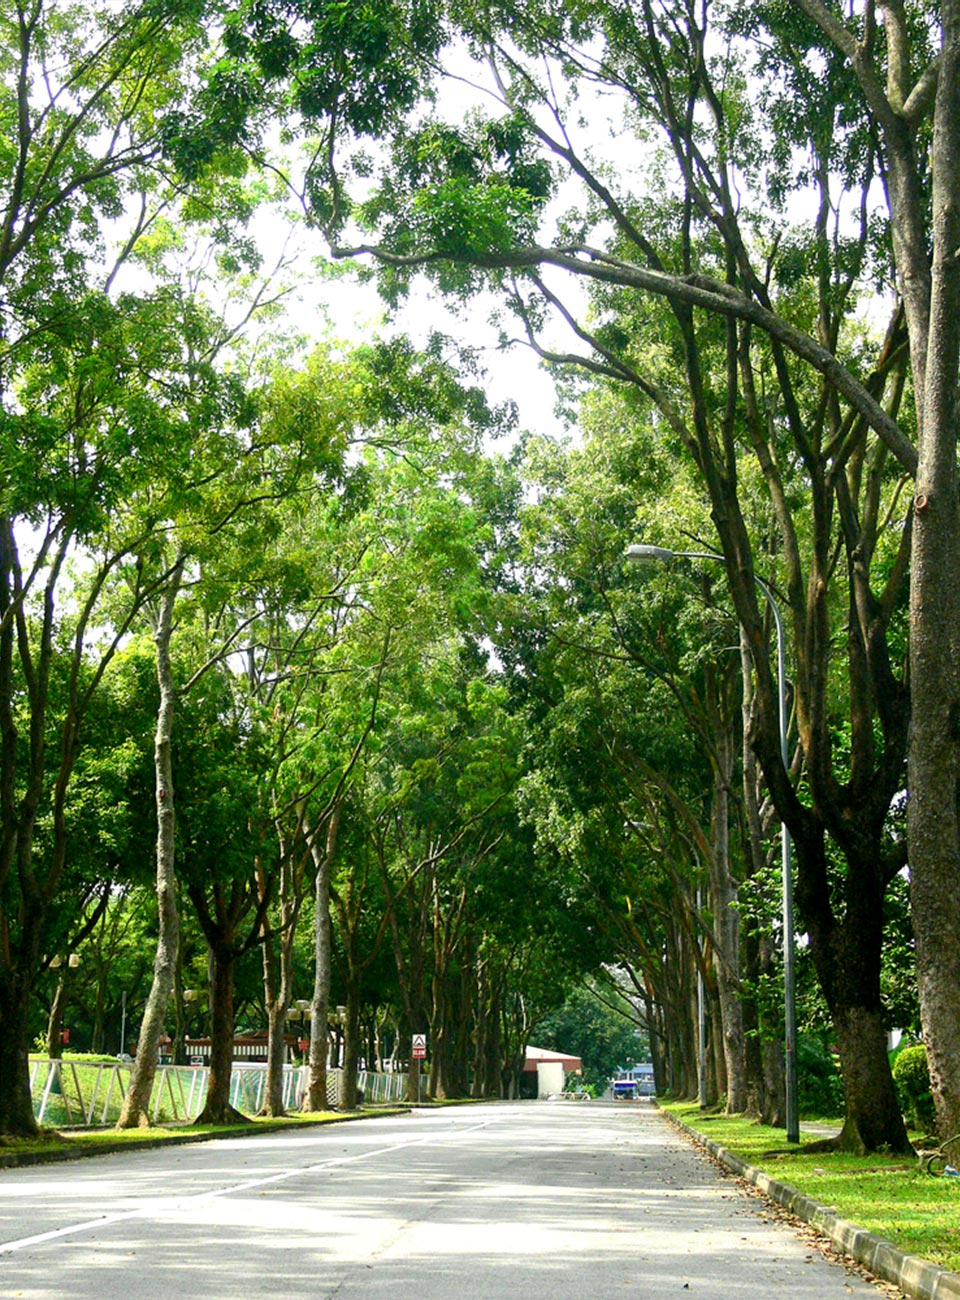 10 Types of Trees Runners Can See Along Singapore Roads